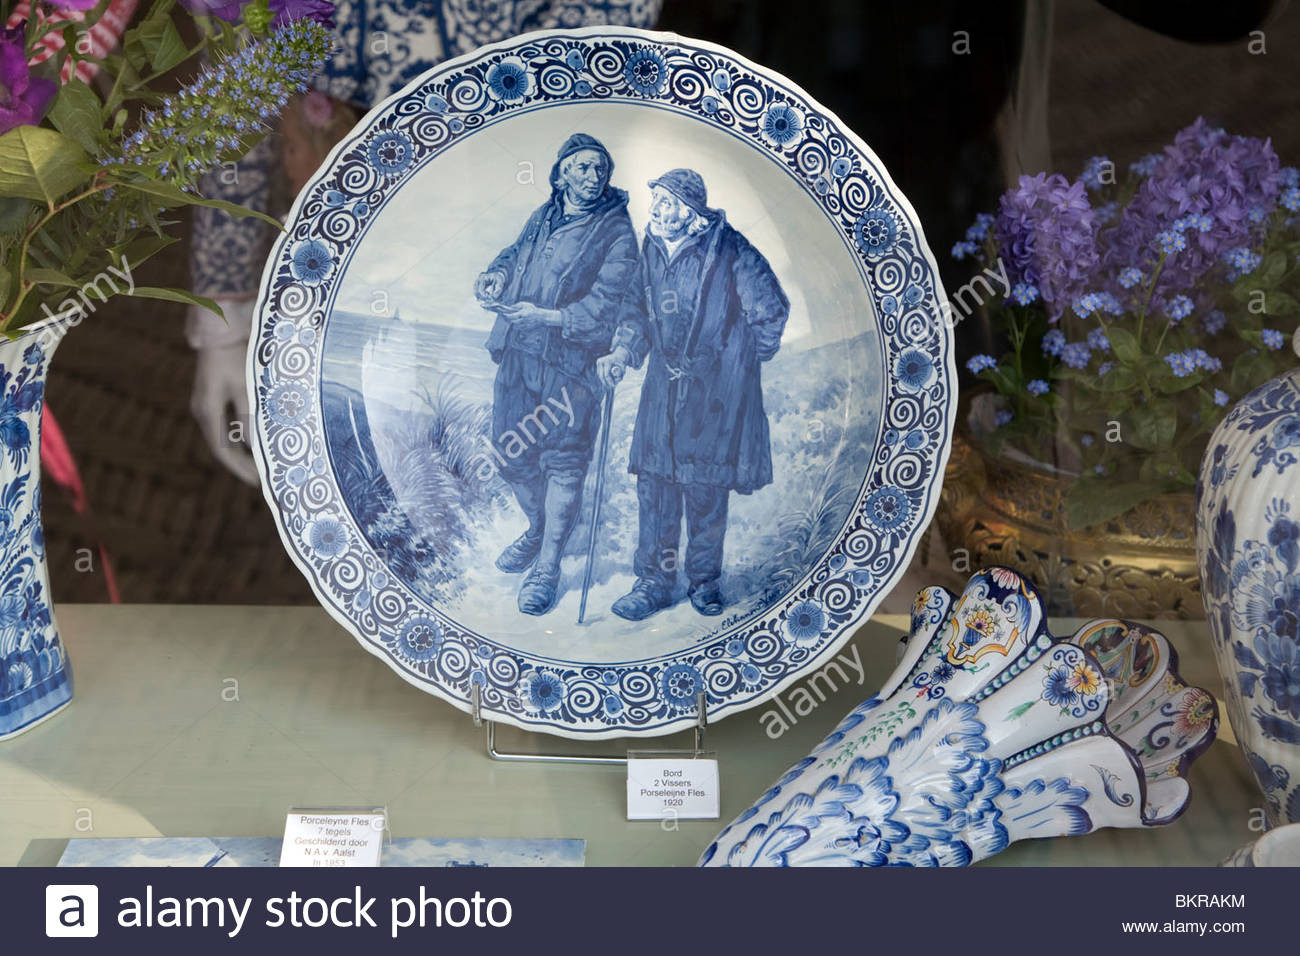 26 attractive Delft Blue Holland Vase 2024 free download delft blue holland vase of delft blue antique stock photos delft blue antique stock images within antique blue and white deftware china delft netherlands stock image